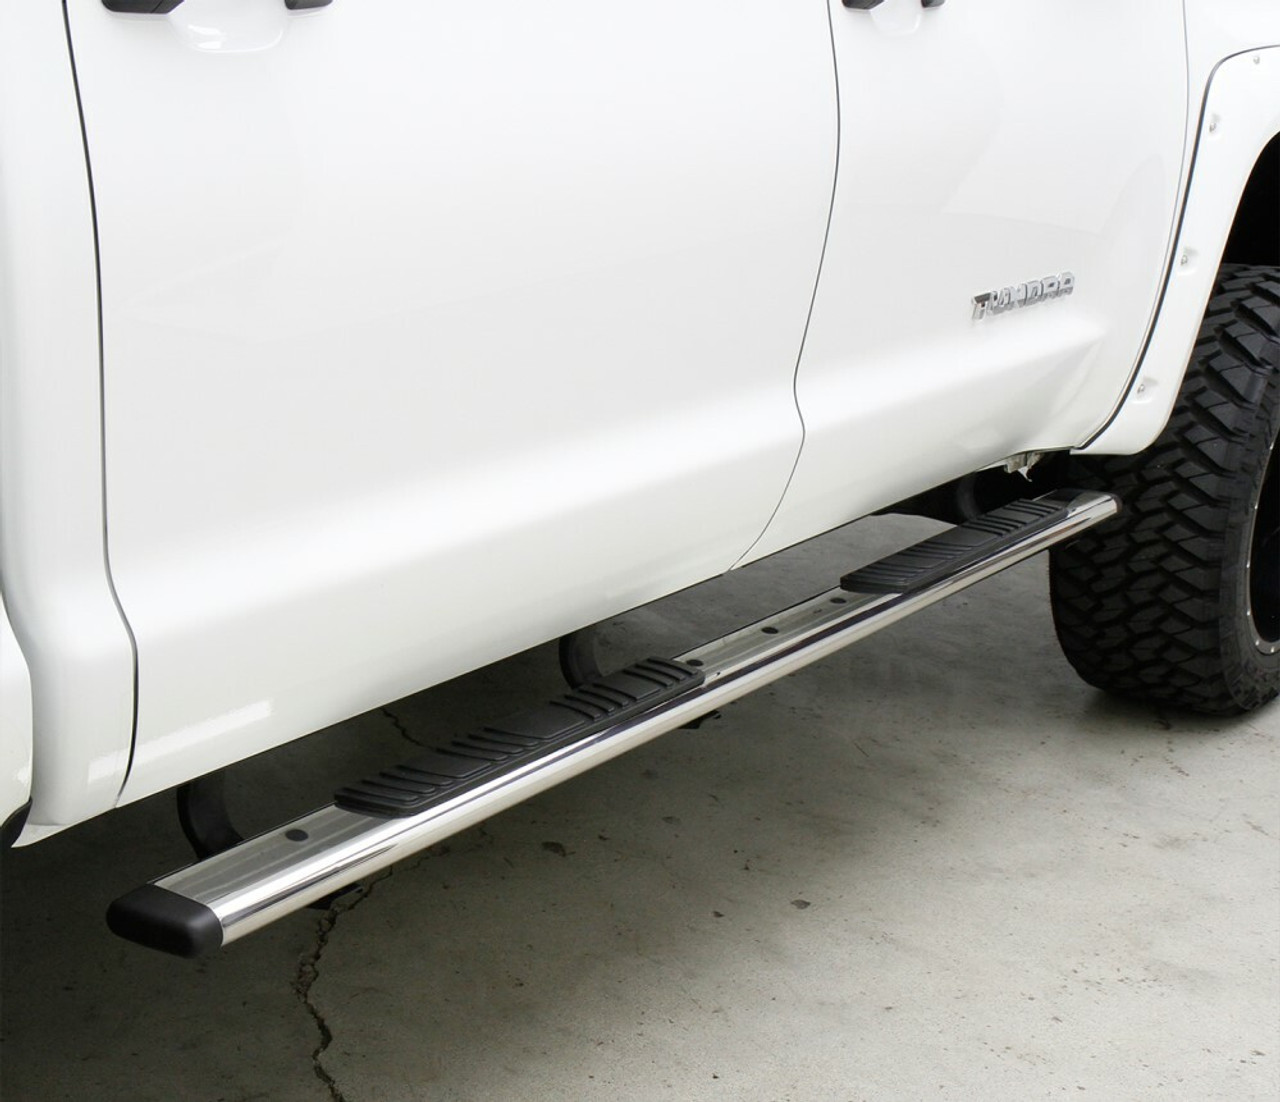 Go Rhino 685415587T Ford, F-150 Raptor, 2017 - 2021, 5 inch OE Xtreme Low Profile - Complete Kit: Sidesteps + Brackets, Galvanized Steel, Textured black, 650087T side bars + 6841555 OE Xtreme Brackets. 5 inch wide x 87 inch long side bars